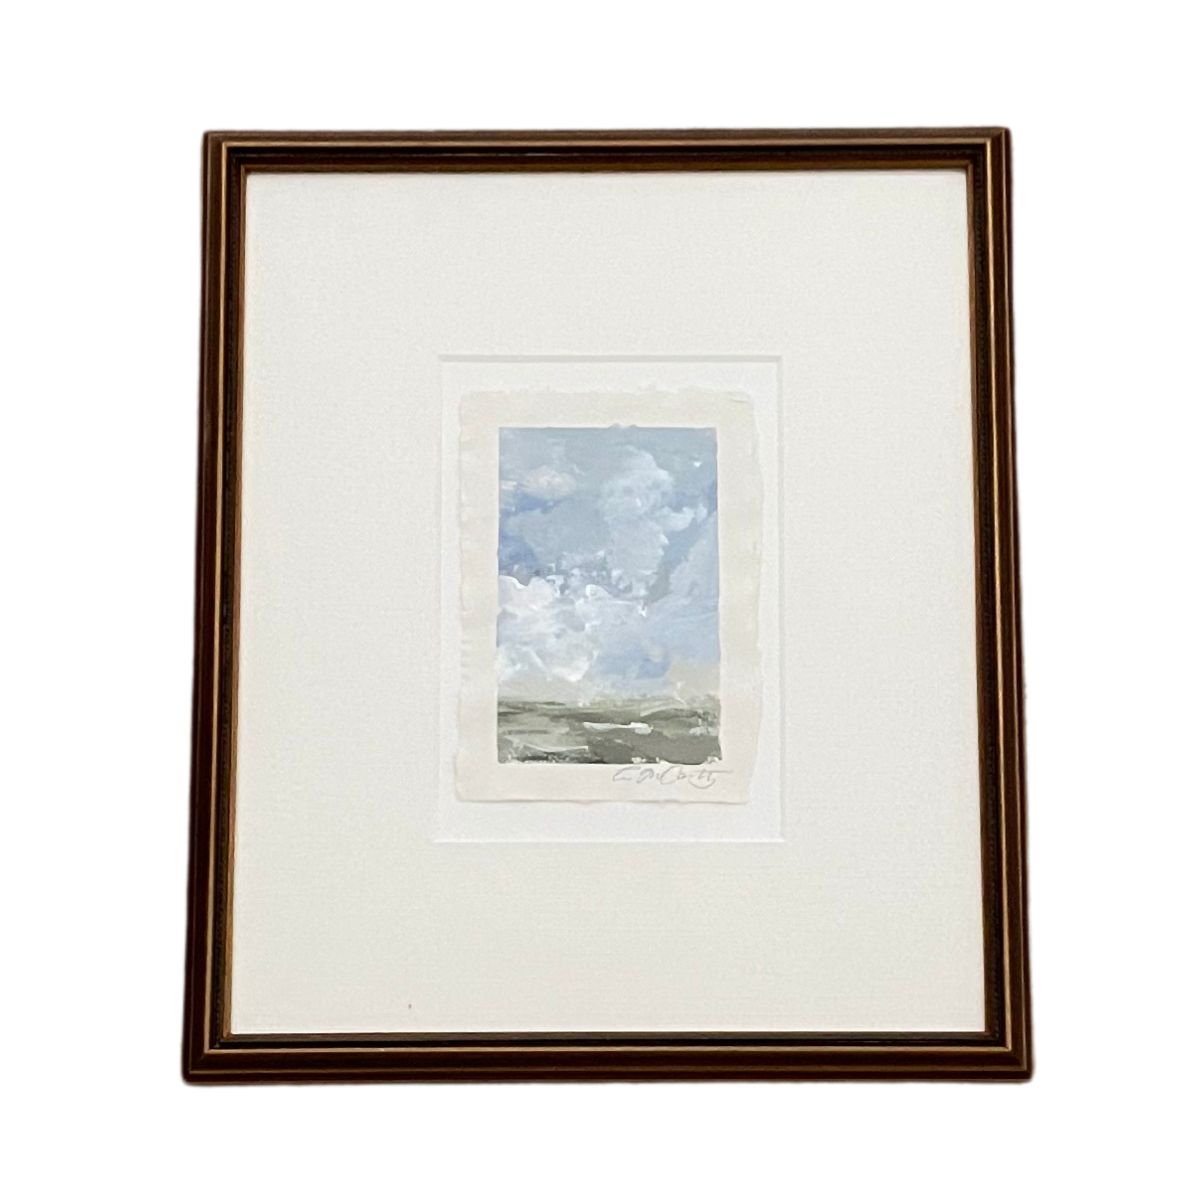 Framed Landscape by Laura McCarty #7